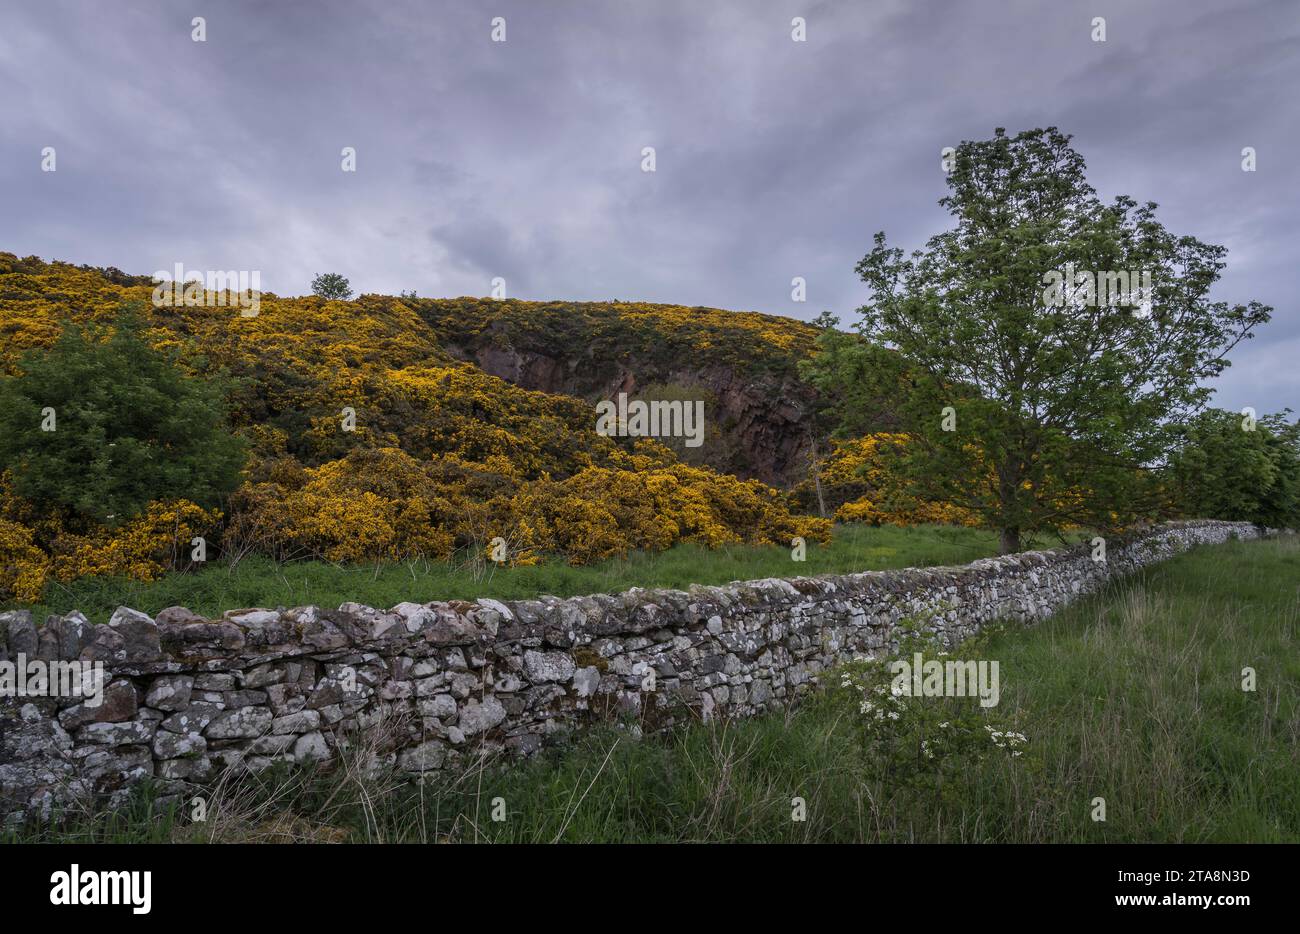 Landscape in the scottish borders near the viewpoint scotts view. Stock Photo